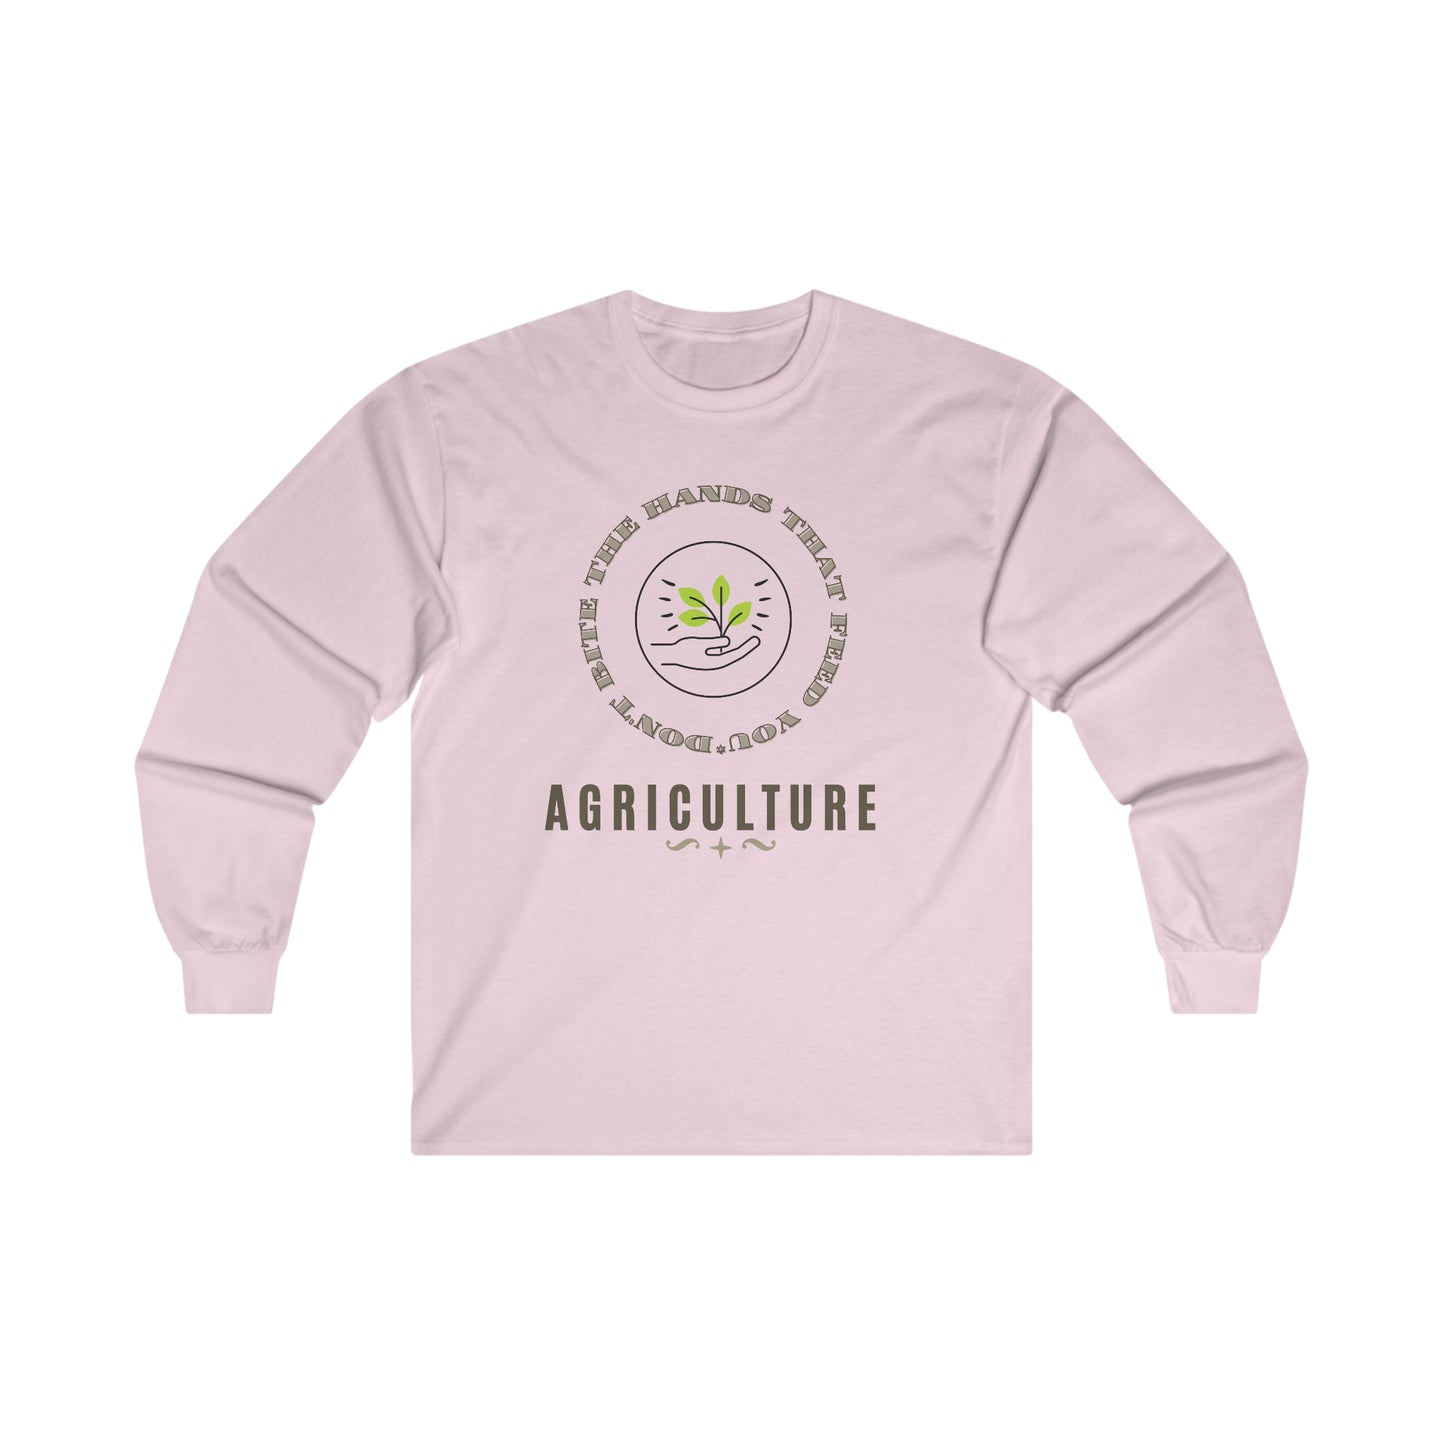 Farmer Agriculture Feeding the World Quote Ultra Cotton Long Sleeve Tee